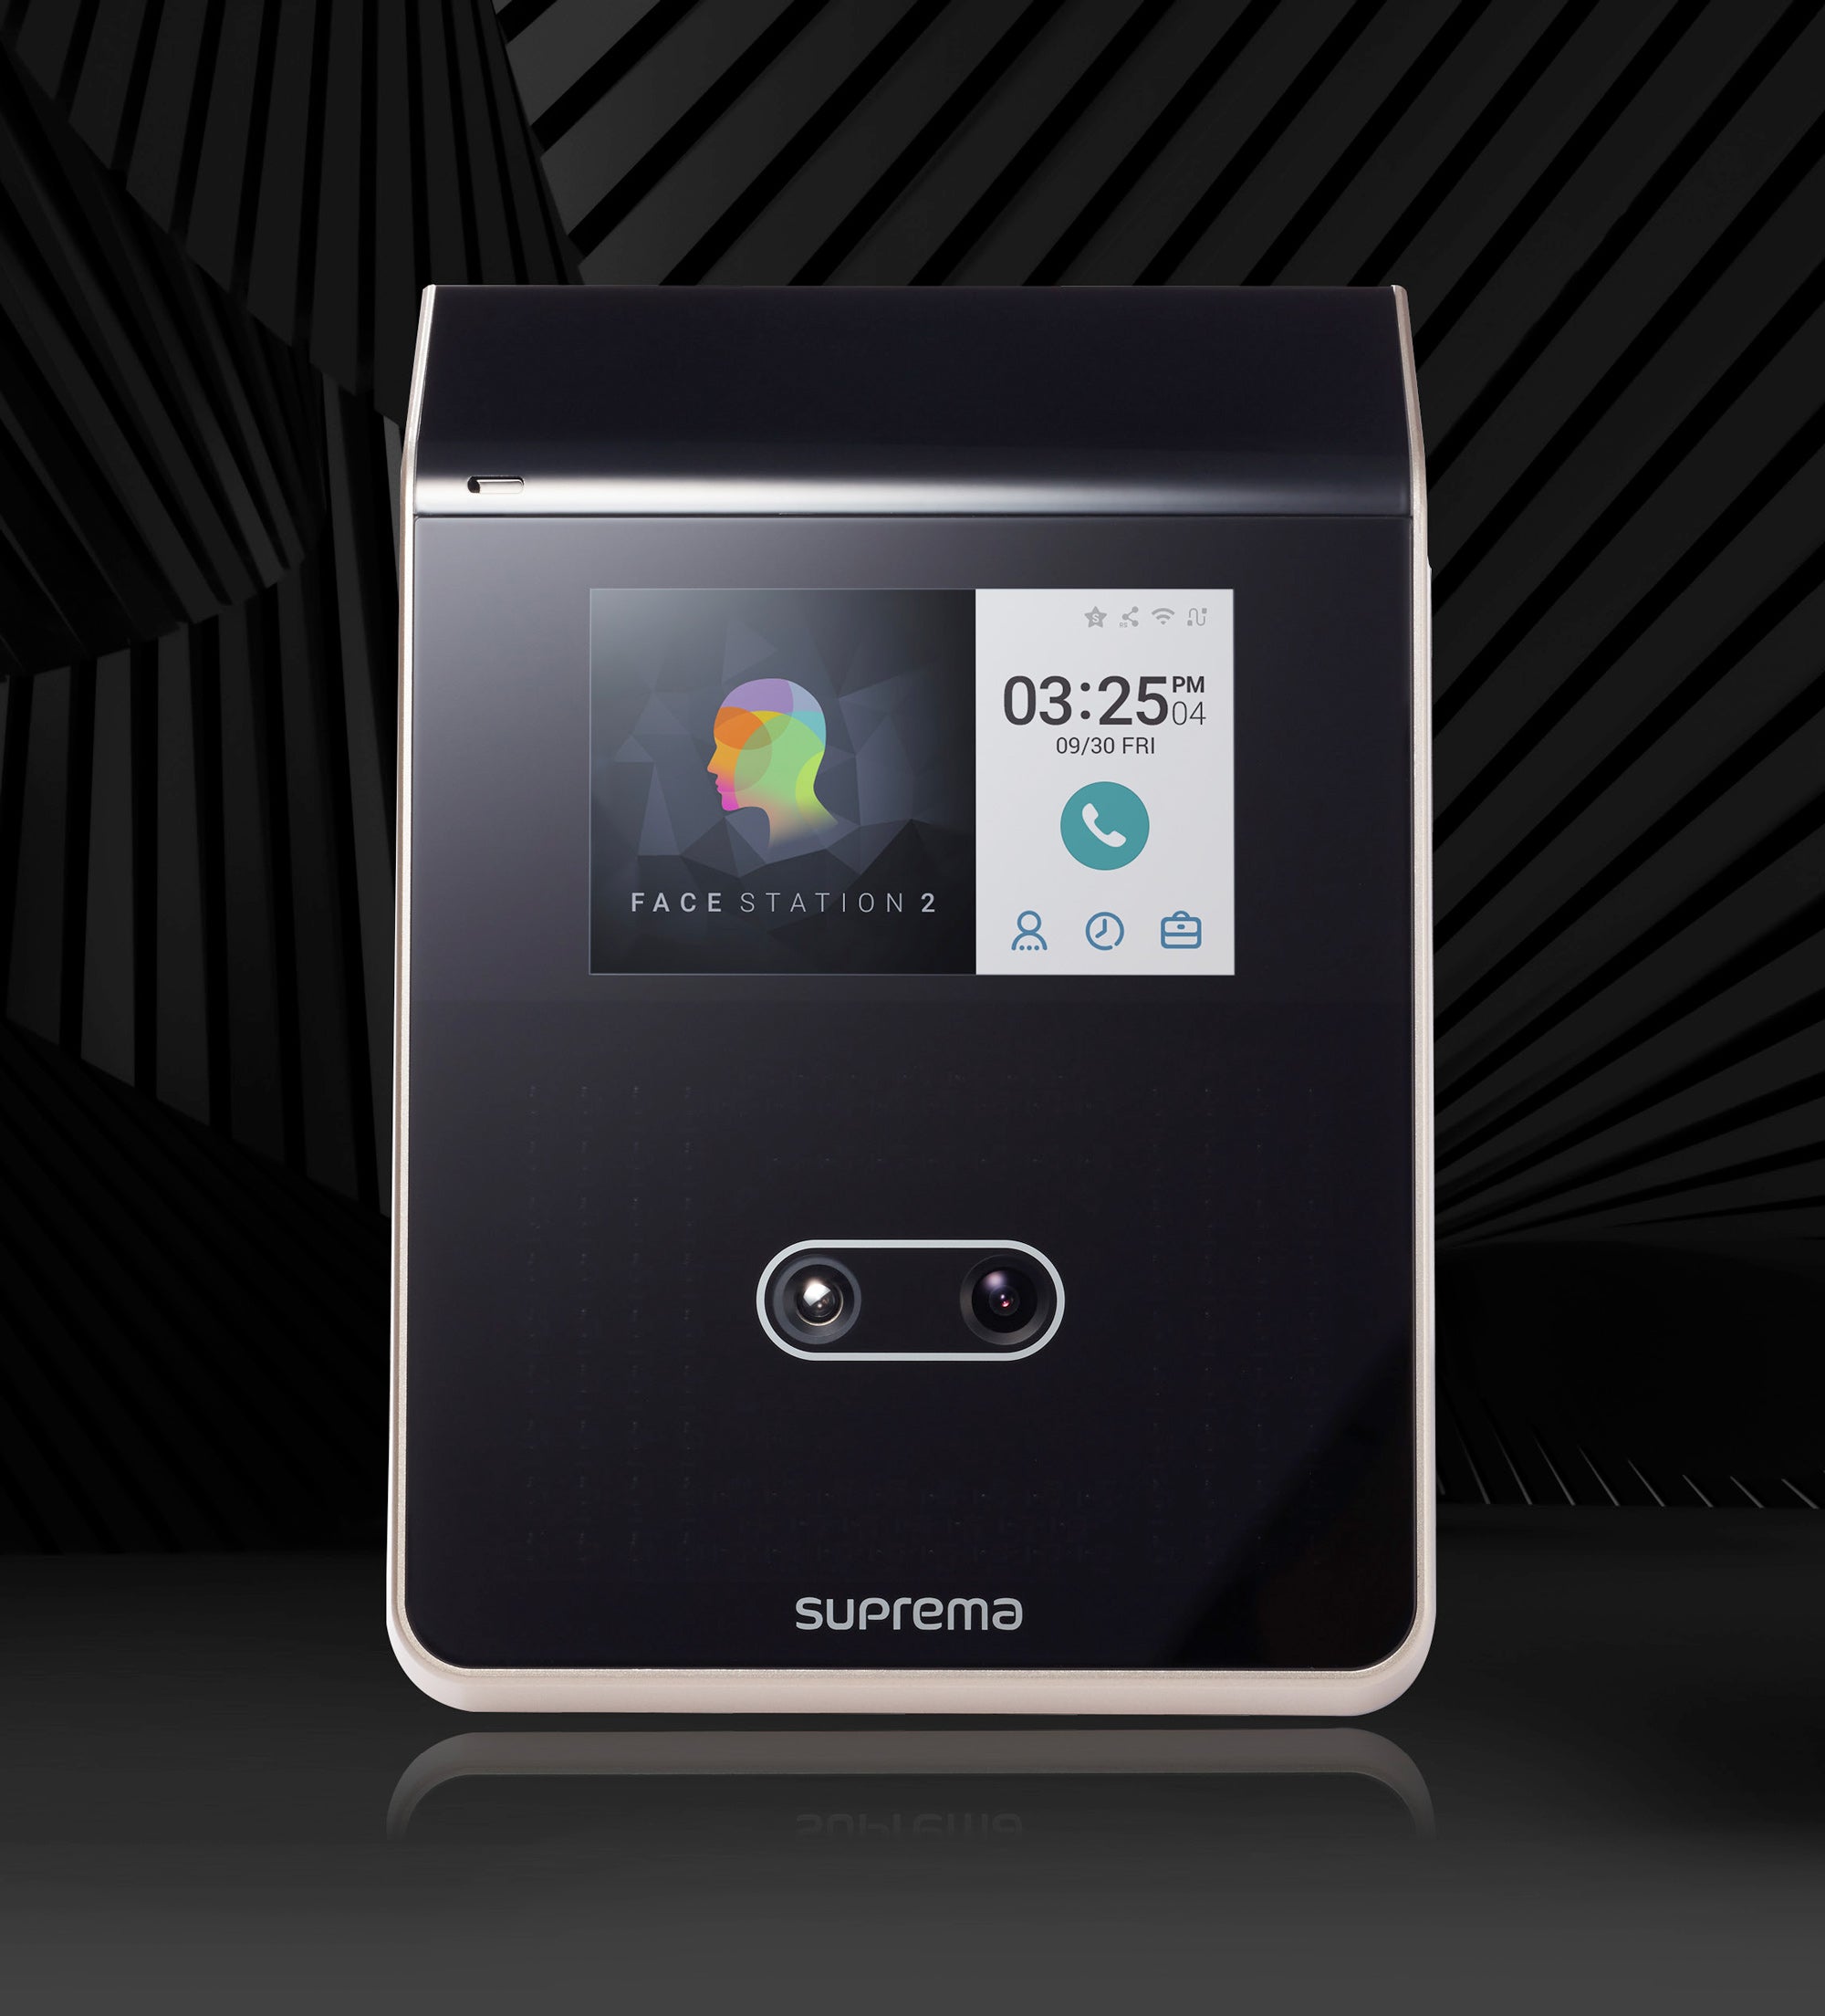 SUPREMA FS2-AWB Facial recognition, FaceStation 2 and RFID reader, Up to 30,000 users, up to 25,000 lx, TCP/IP, Wiegand, RS485, 1x Relay, Anti tamper, HID, HID iClass, Mifare, NFC & BLE, WiFi, 24V DC